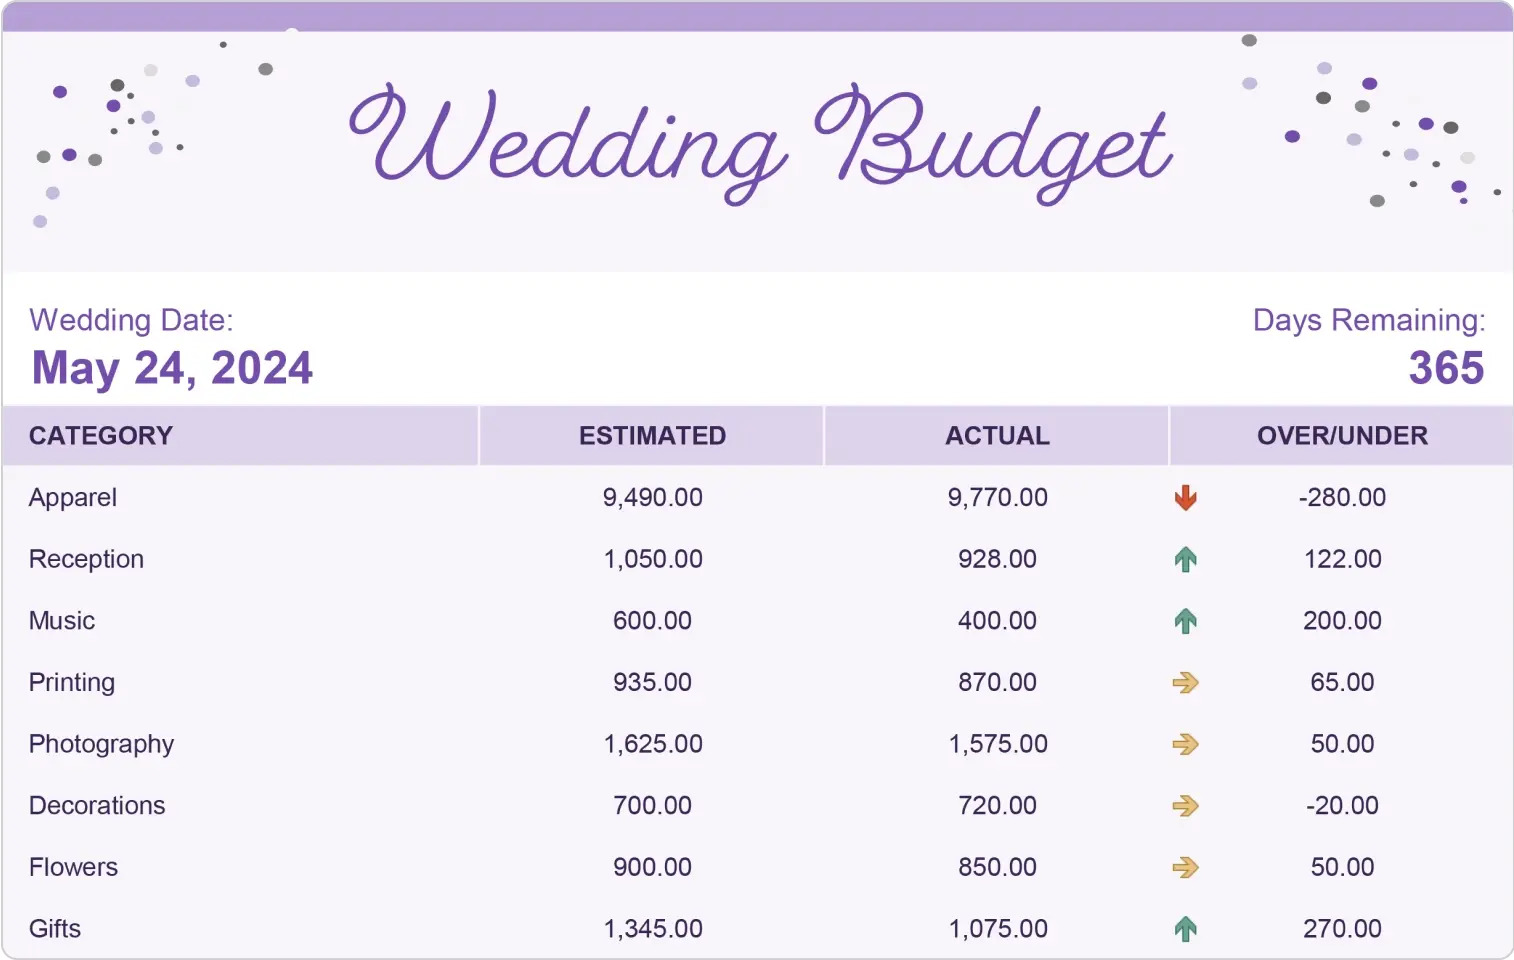 An image of an Excel wedding budget template